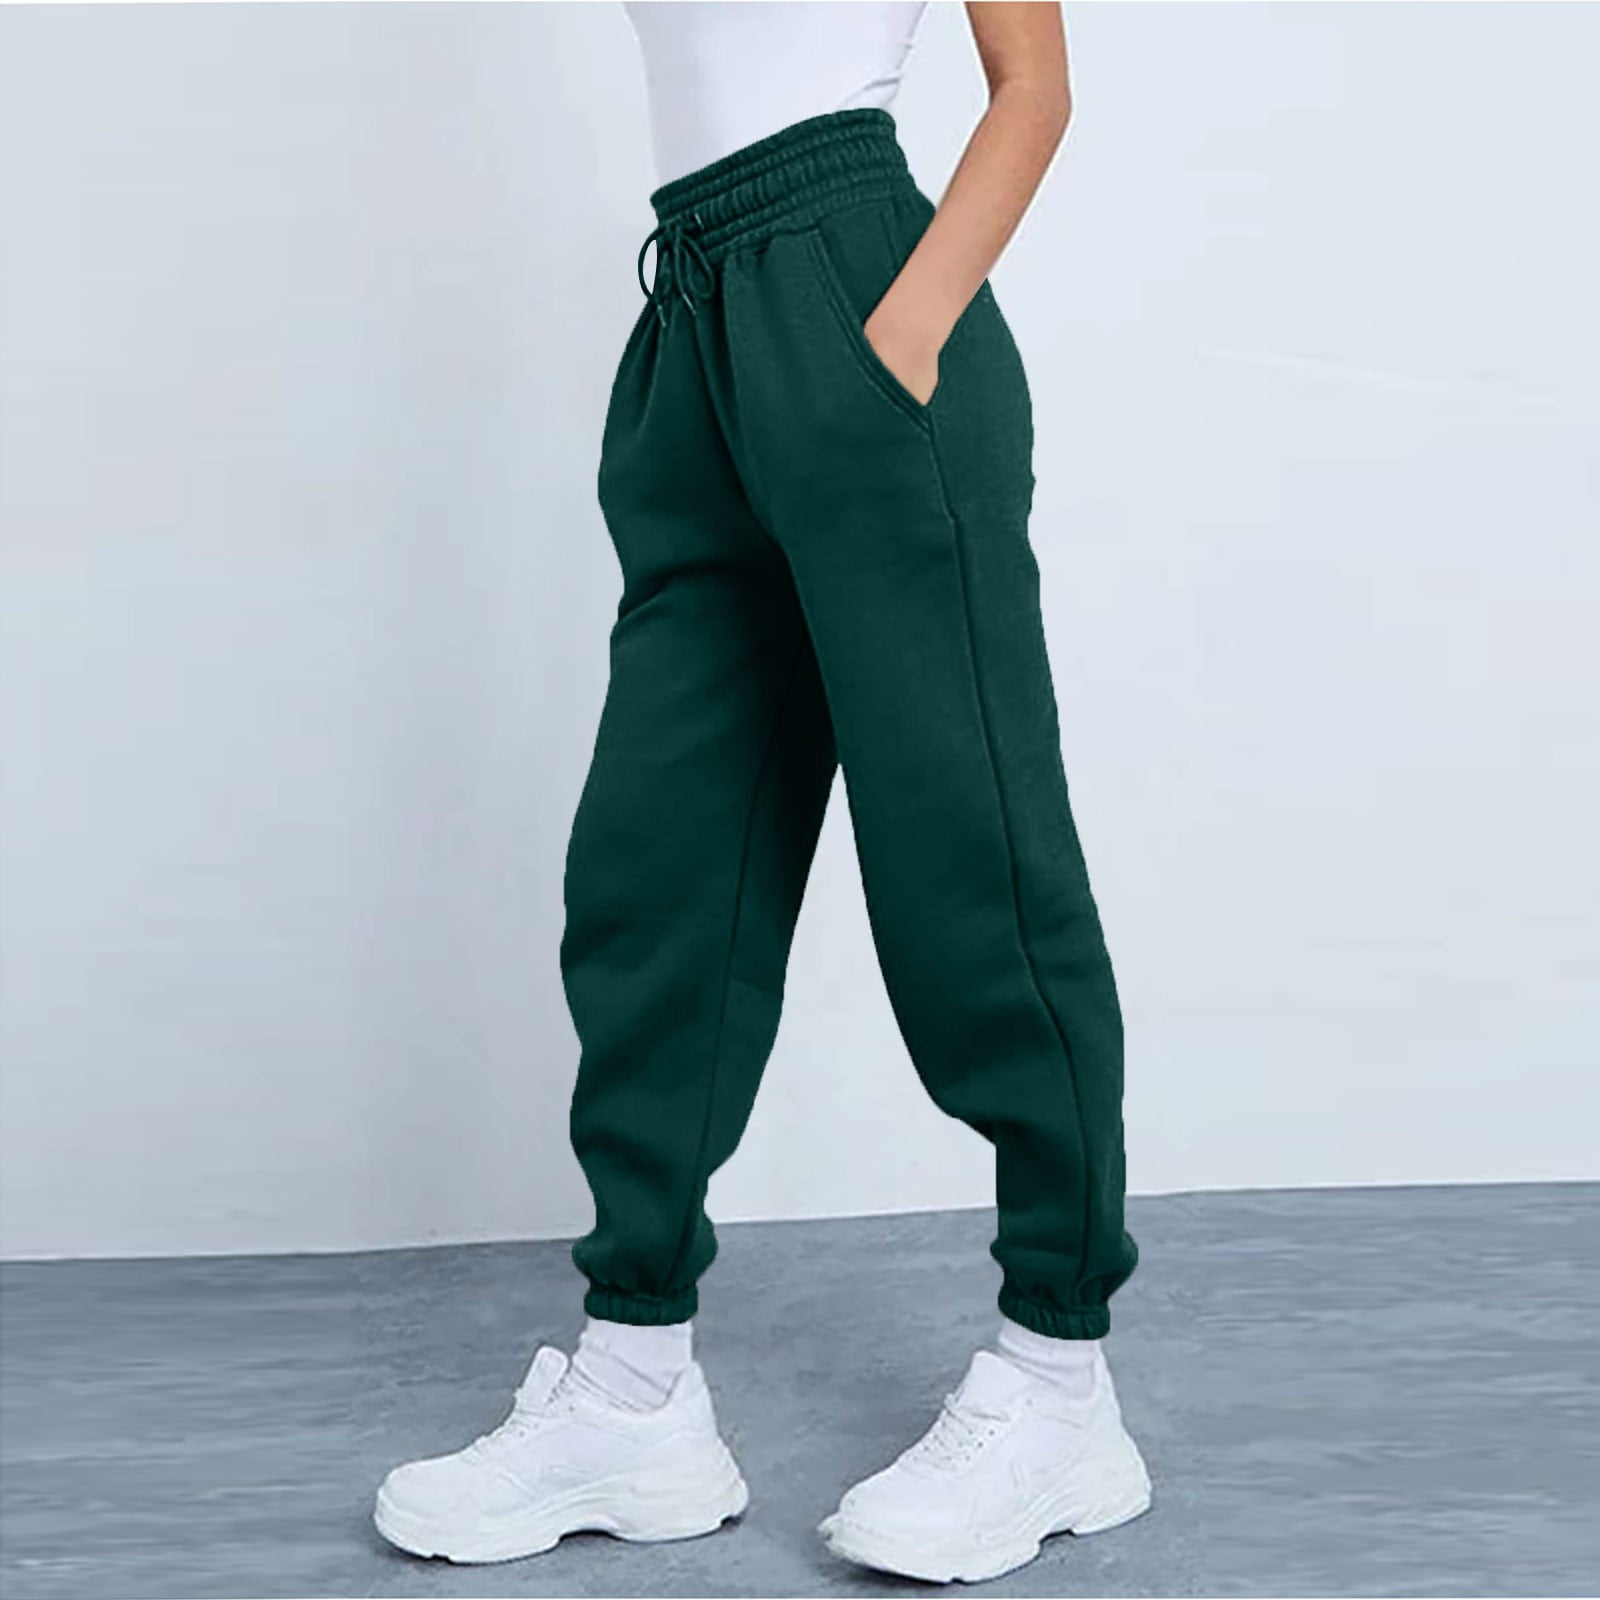 Susanny Tall Sweatpants for Women Drawstring Straight Leg with Pockets  Fleece Lined Lounge Pants High Waisted Comfy Baggy Petite Lazy Sweatpants  Black S 